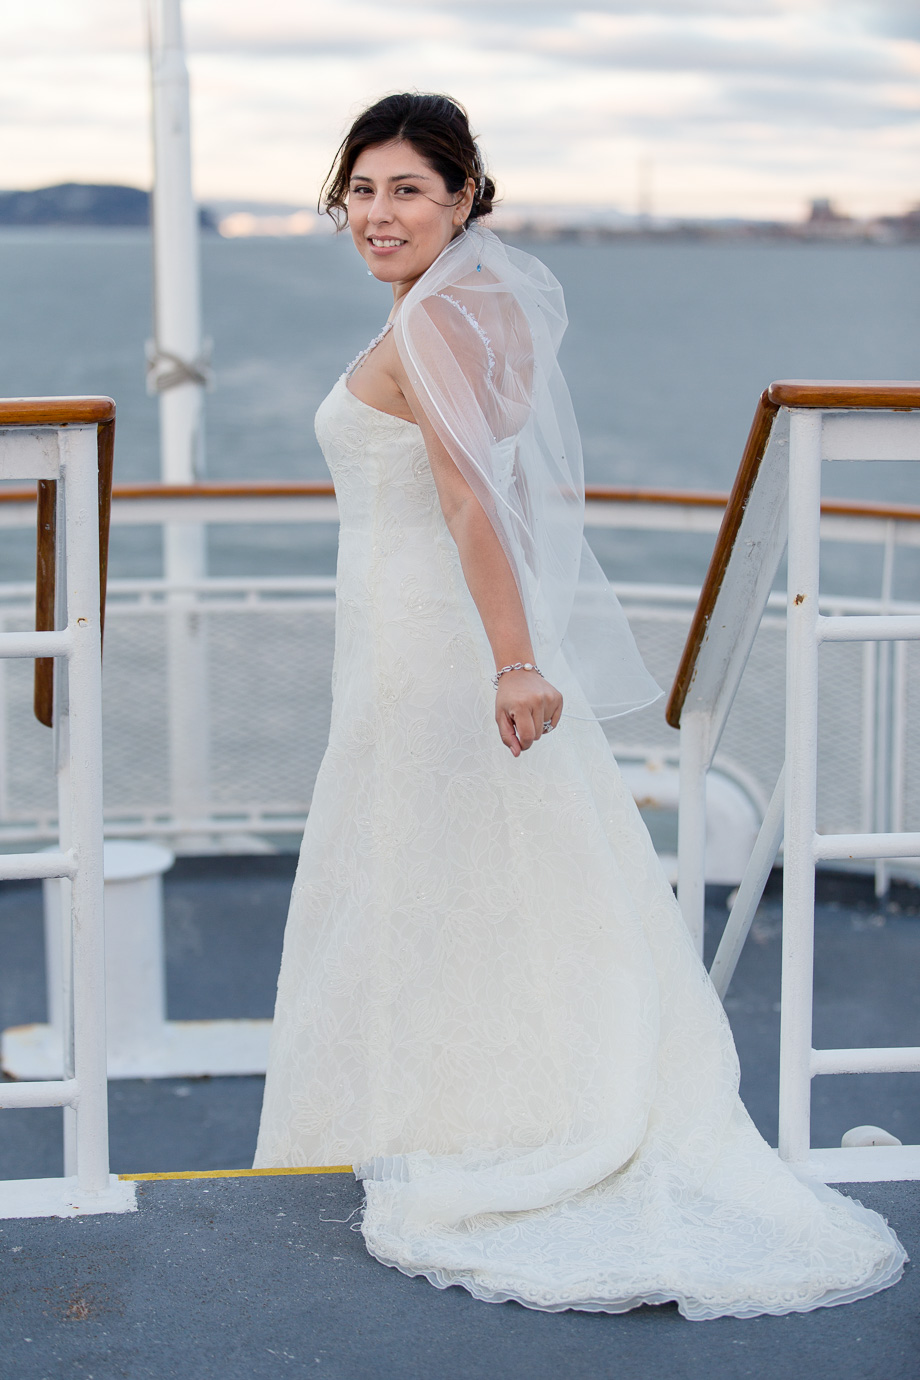 Bride on the top deck of the cruise ship looking back